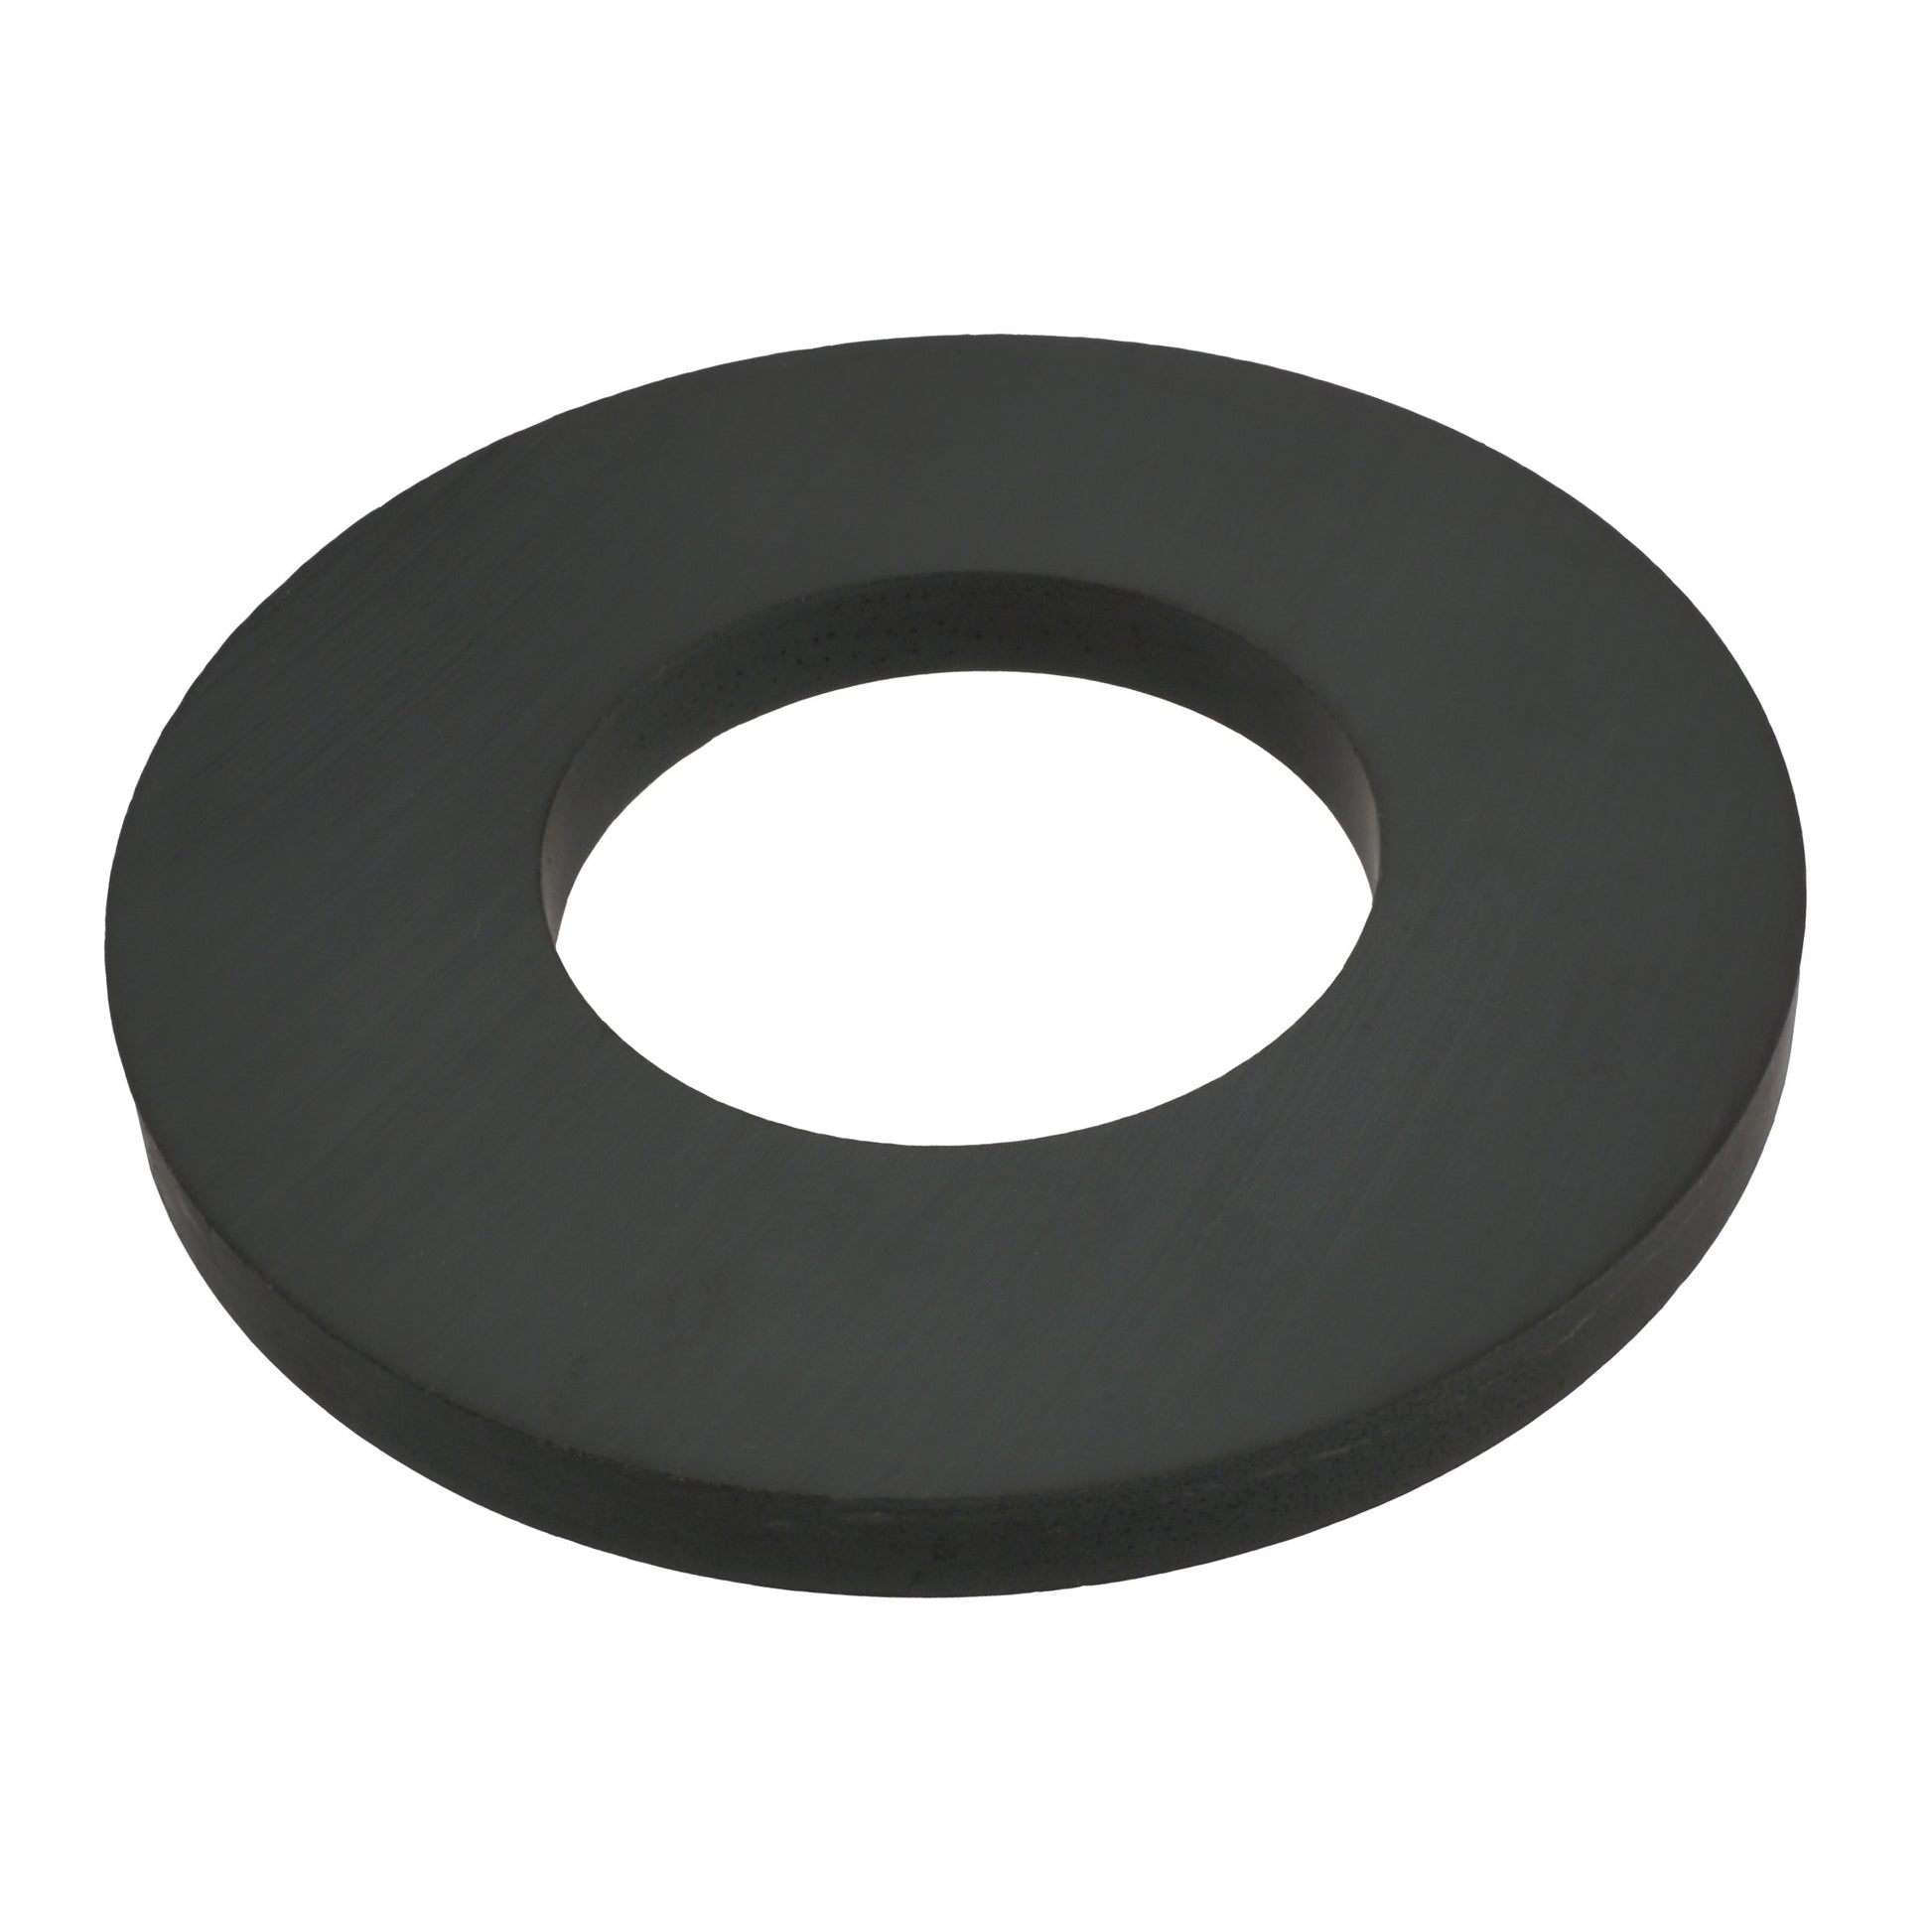 Load image into Gallery viewer, CR45 Ceramic Ring Magnet - 45 Degree Angle View